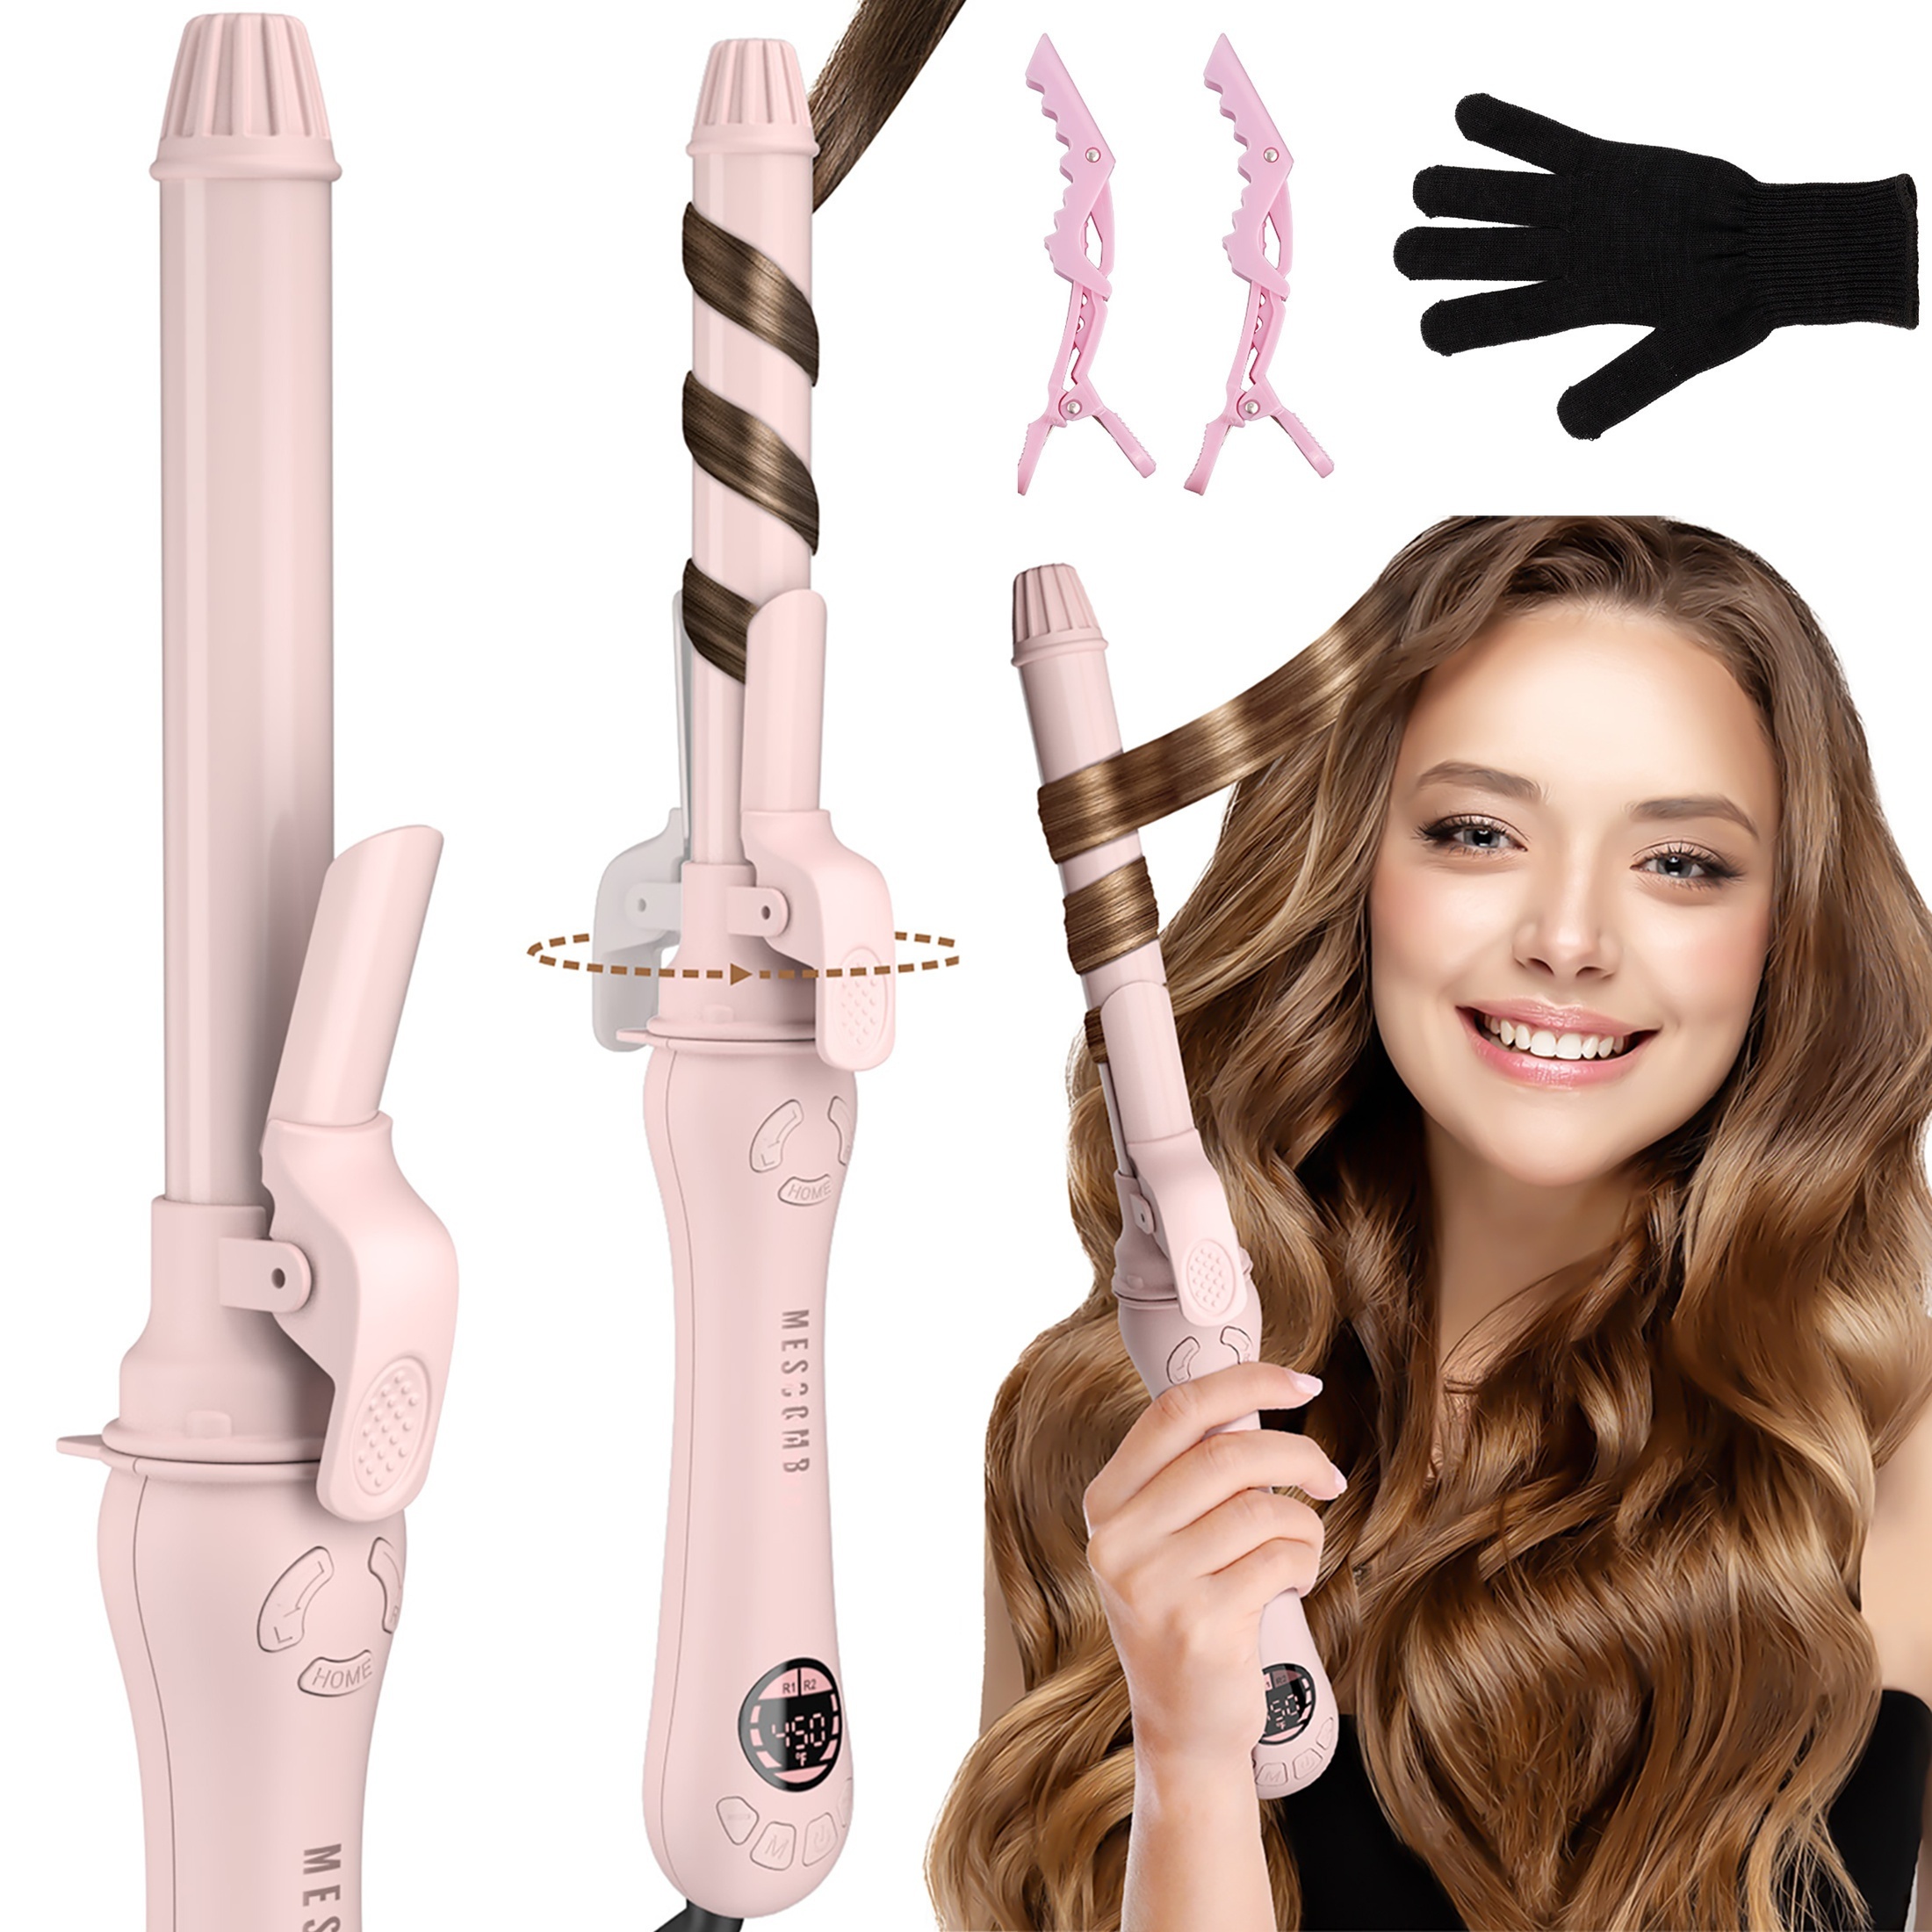 

1" Auto Rotating Curling Iron, 140°f To 450°f, 1h Auto Off, 120v & 240v, For Waves, Beach -pink